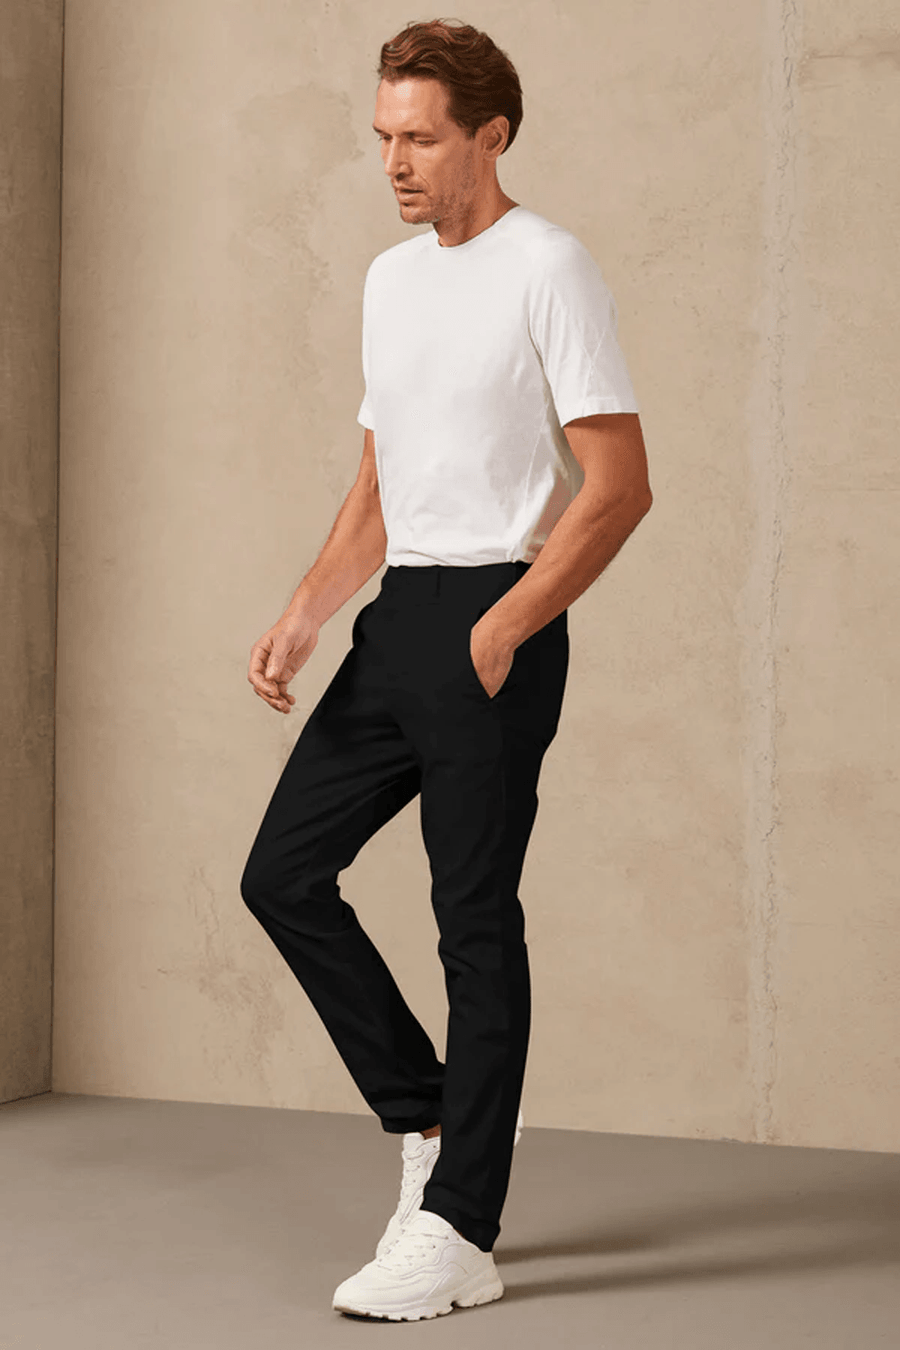 Buy the Transit Soft Cotton Chinos in Black at Intro. Spend £50 for free UK delivery. Official stockists. We ship worldwide.